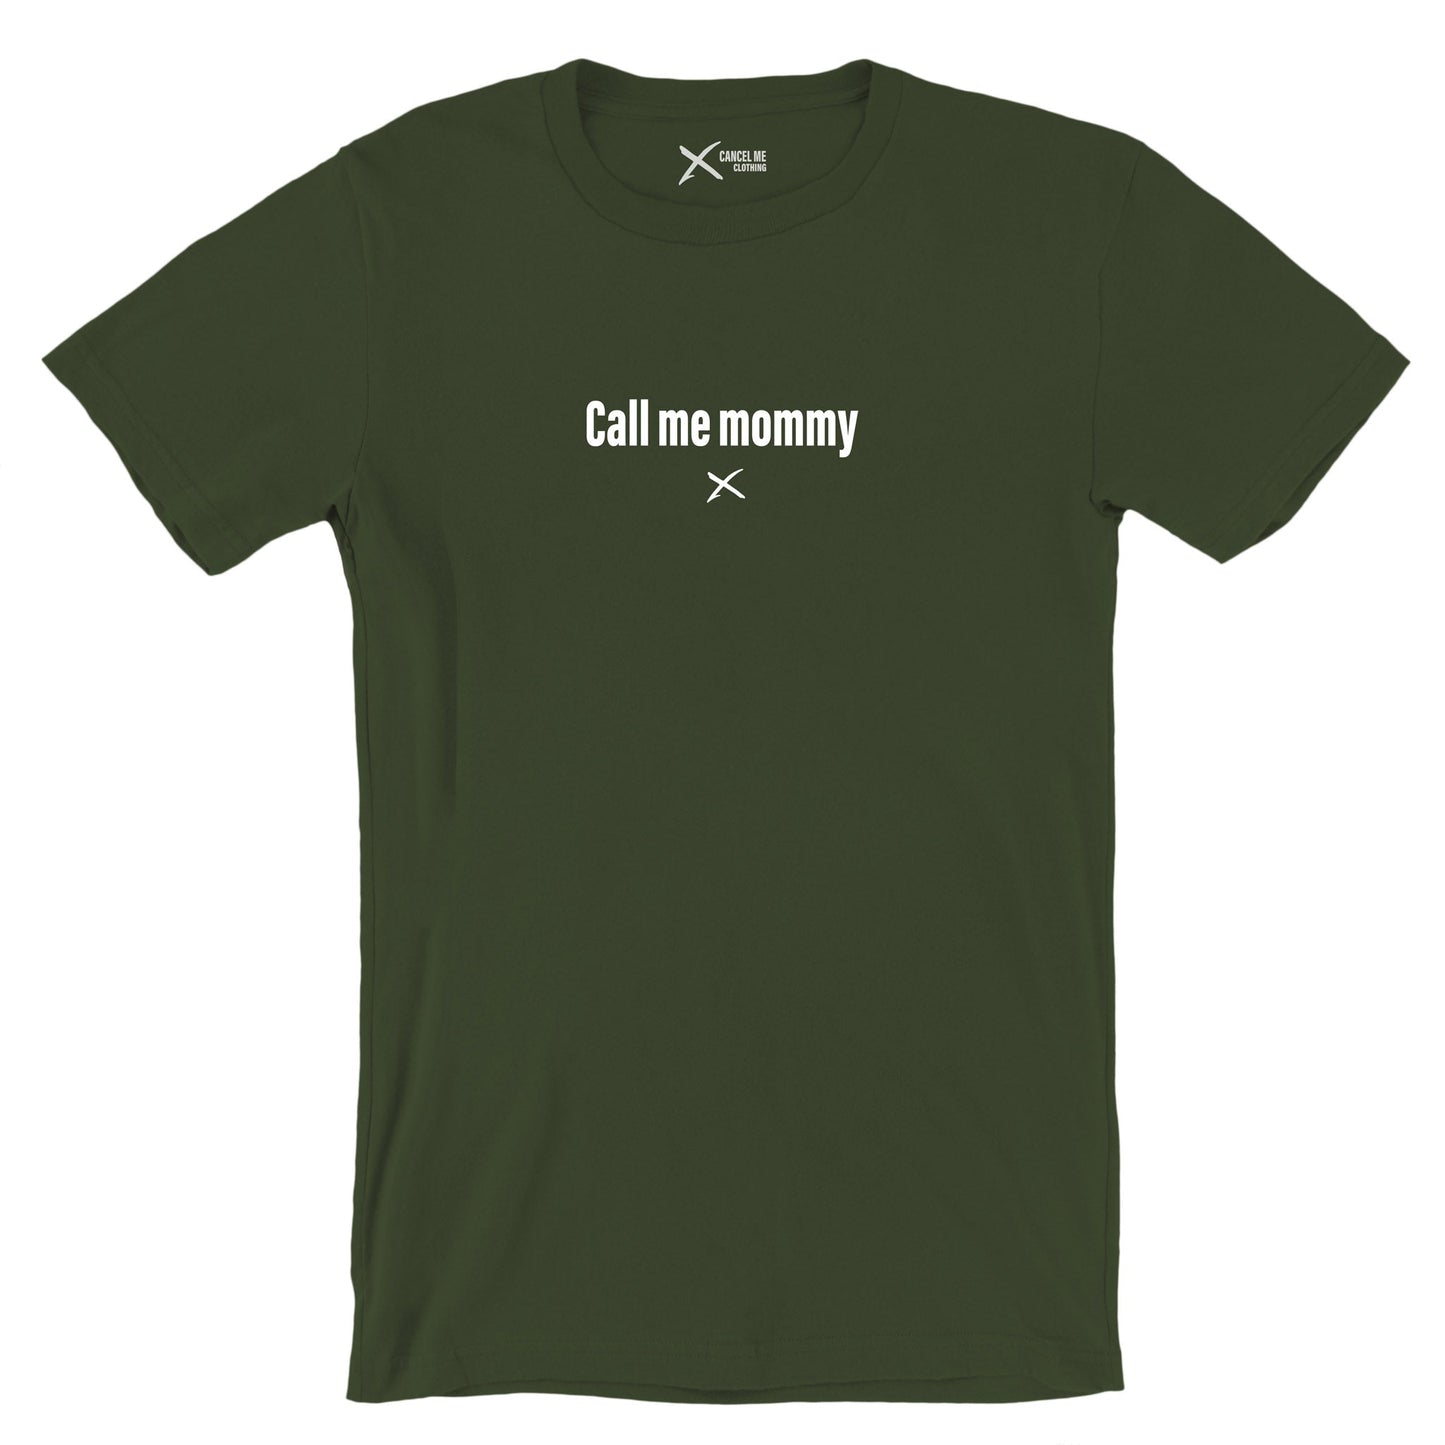 Call me mommy - Shirt